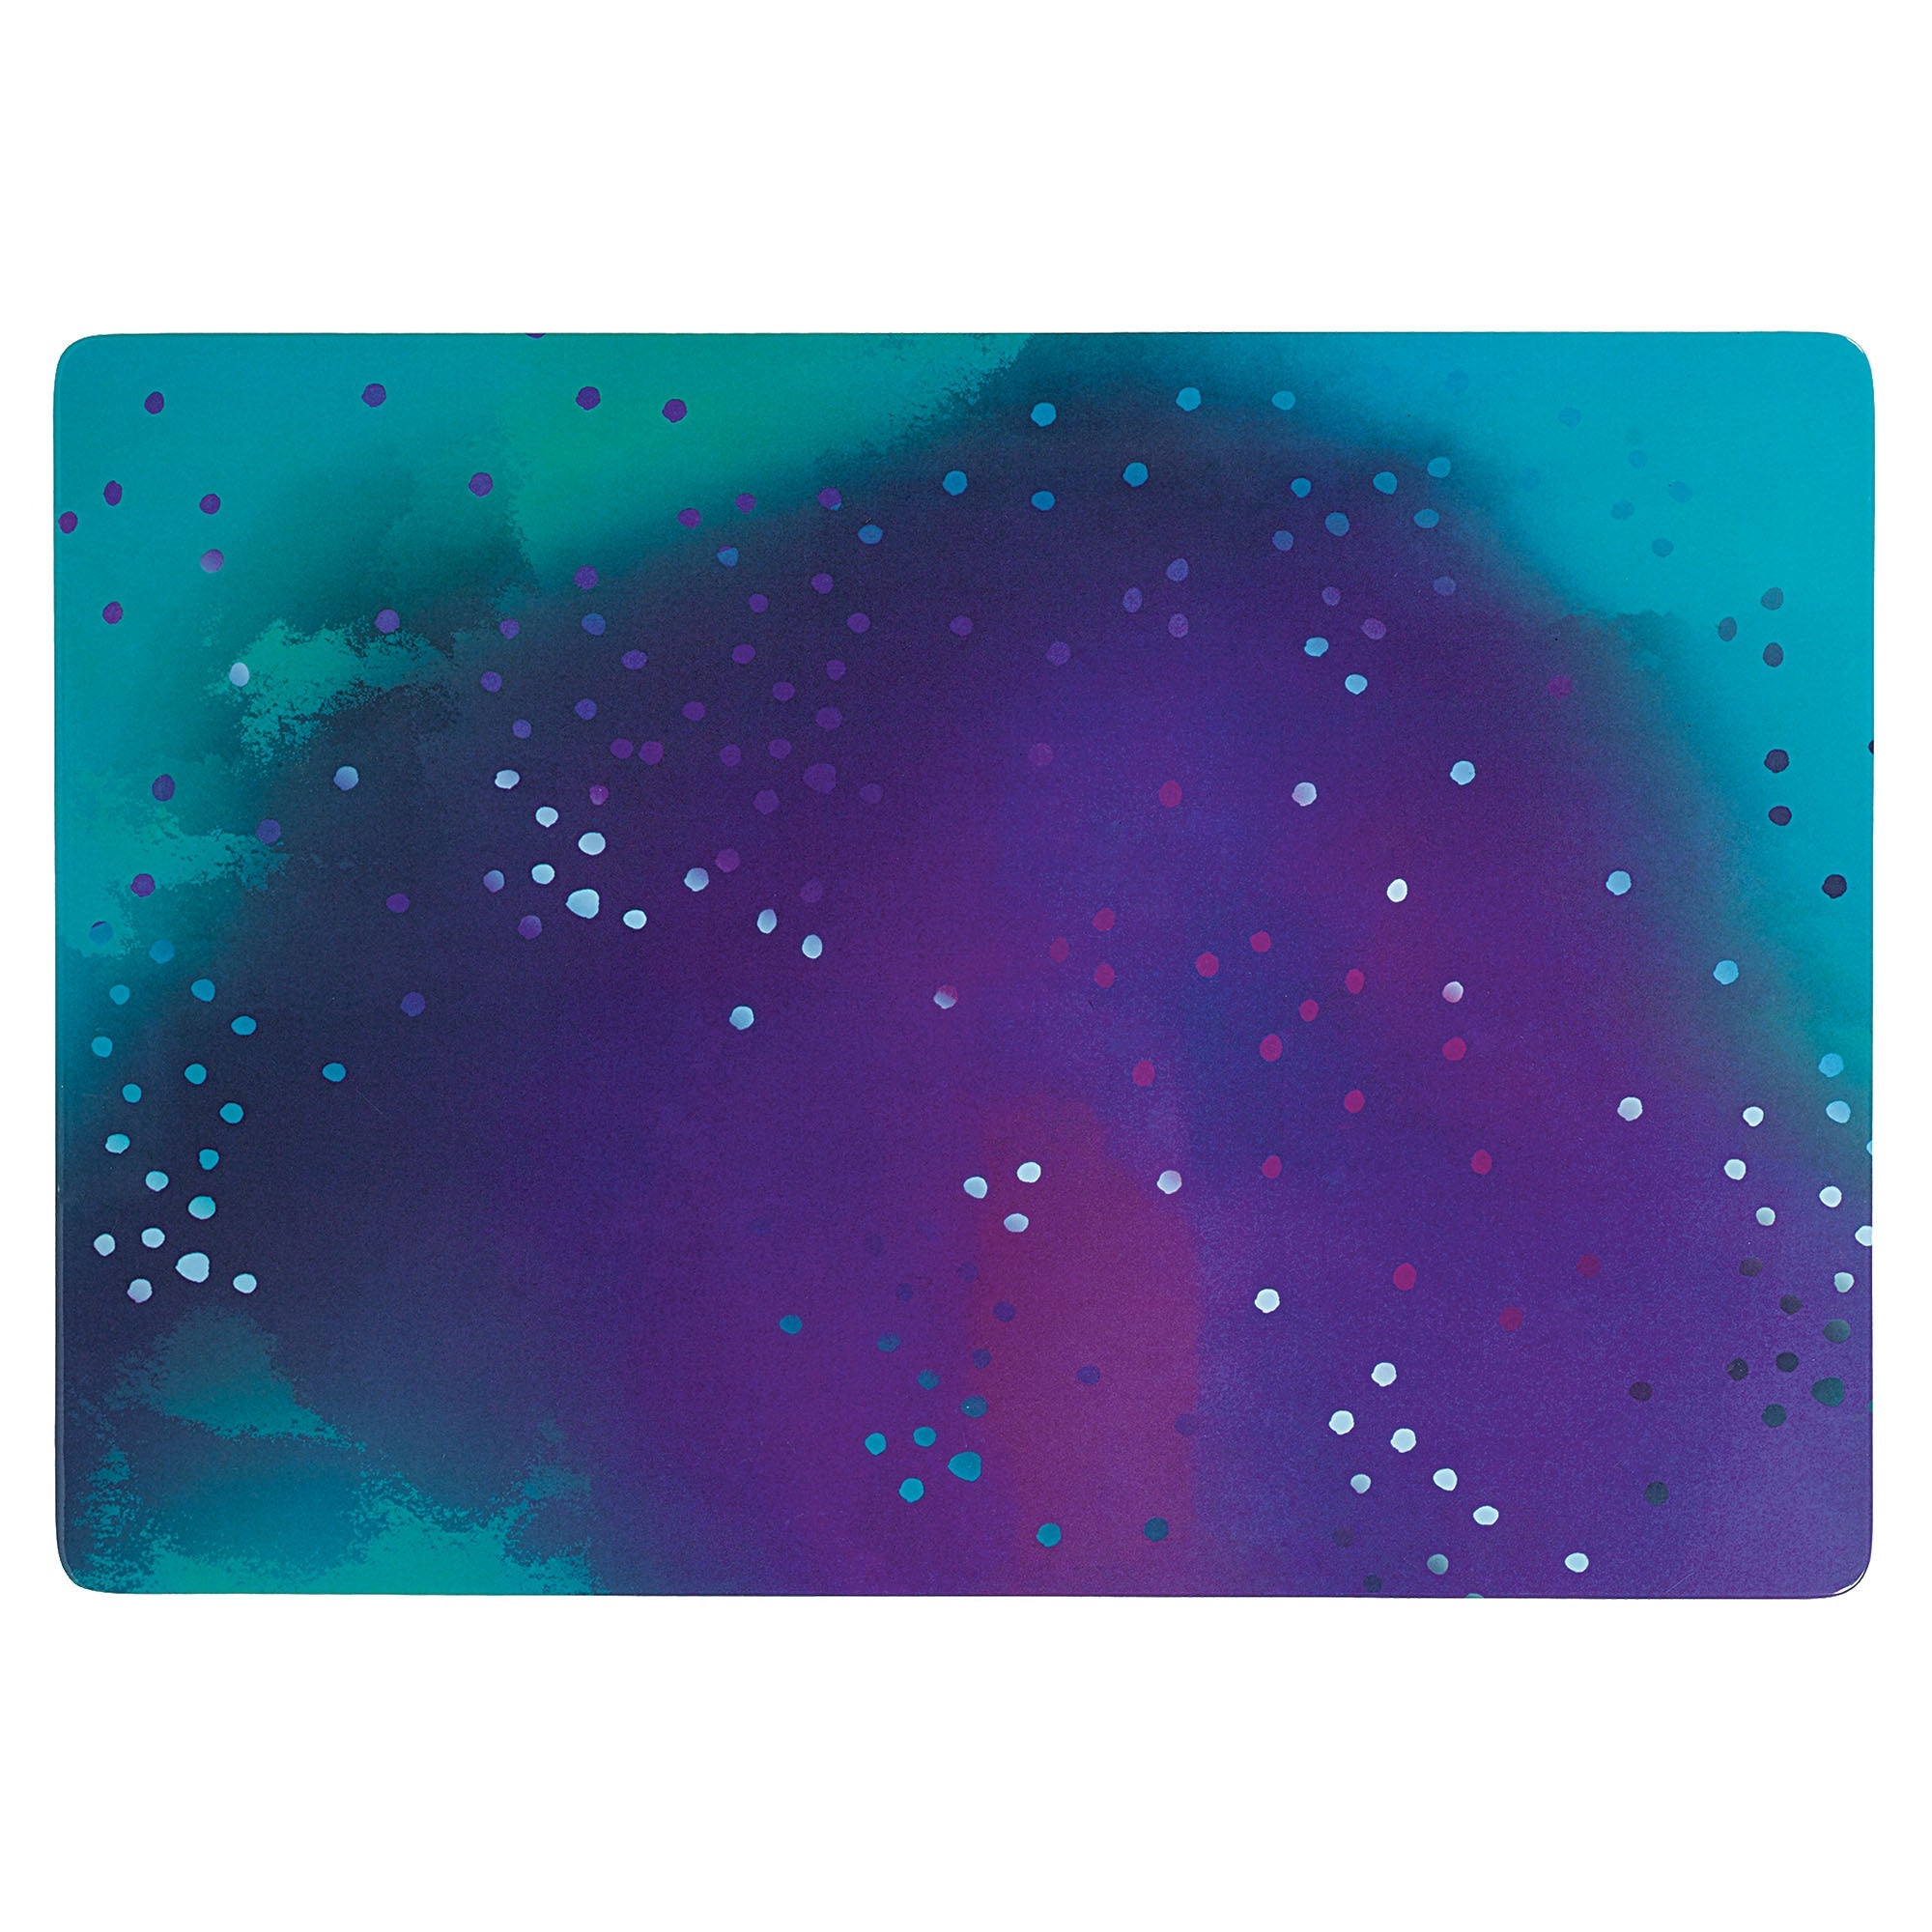 Sparkling Sapphire  Serving Tray  Melamine  11x16in